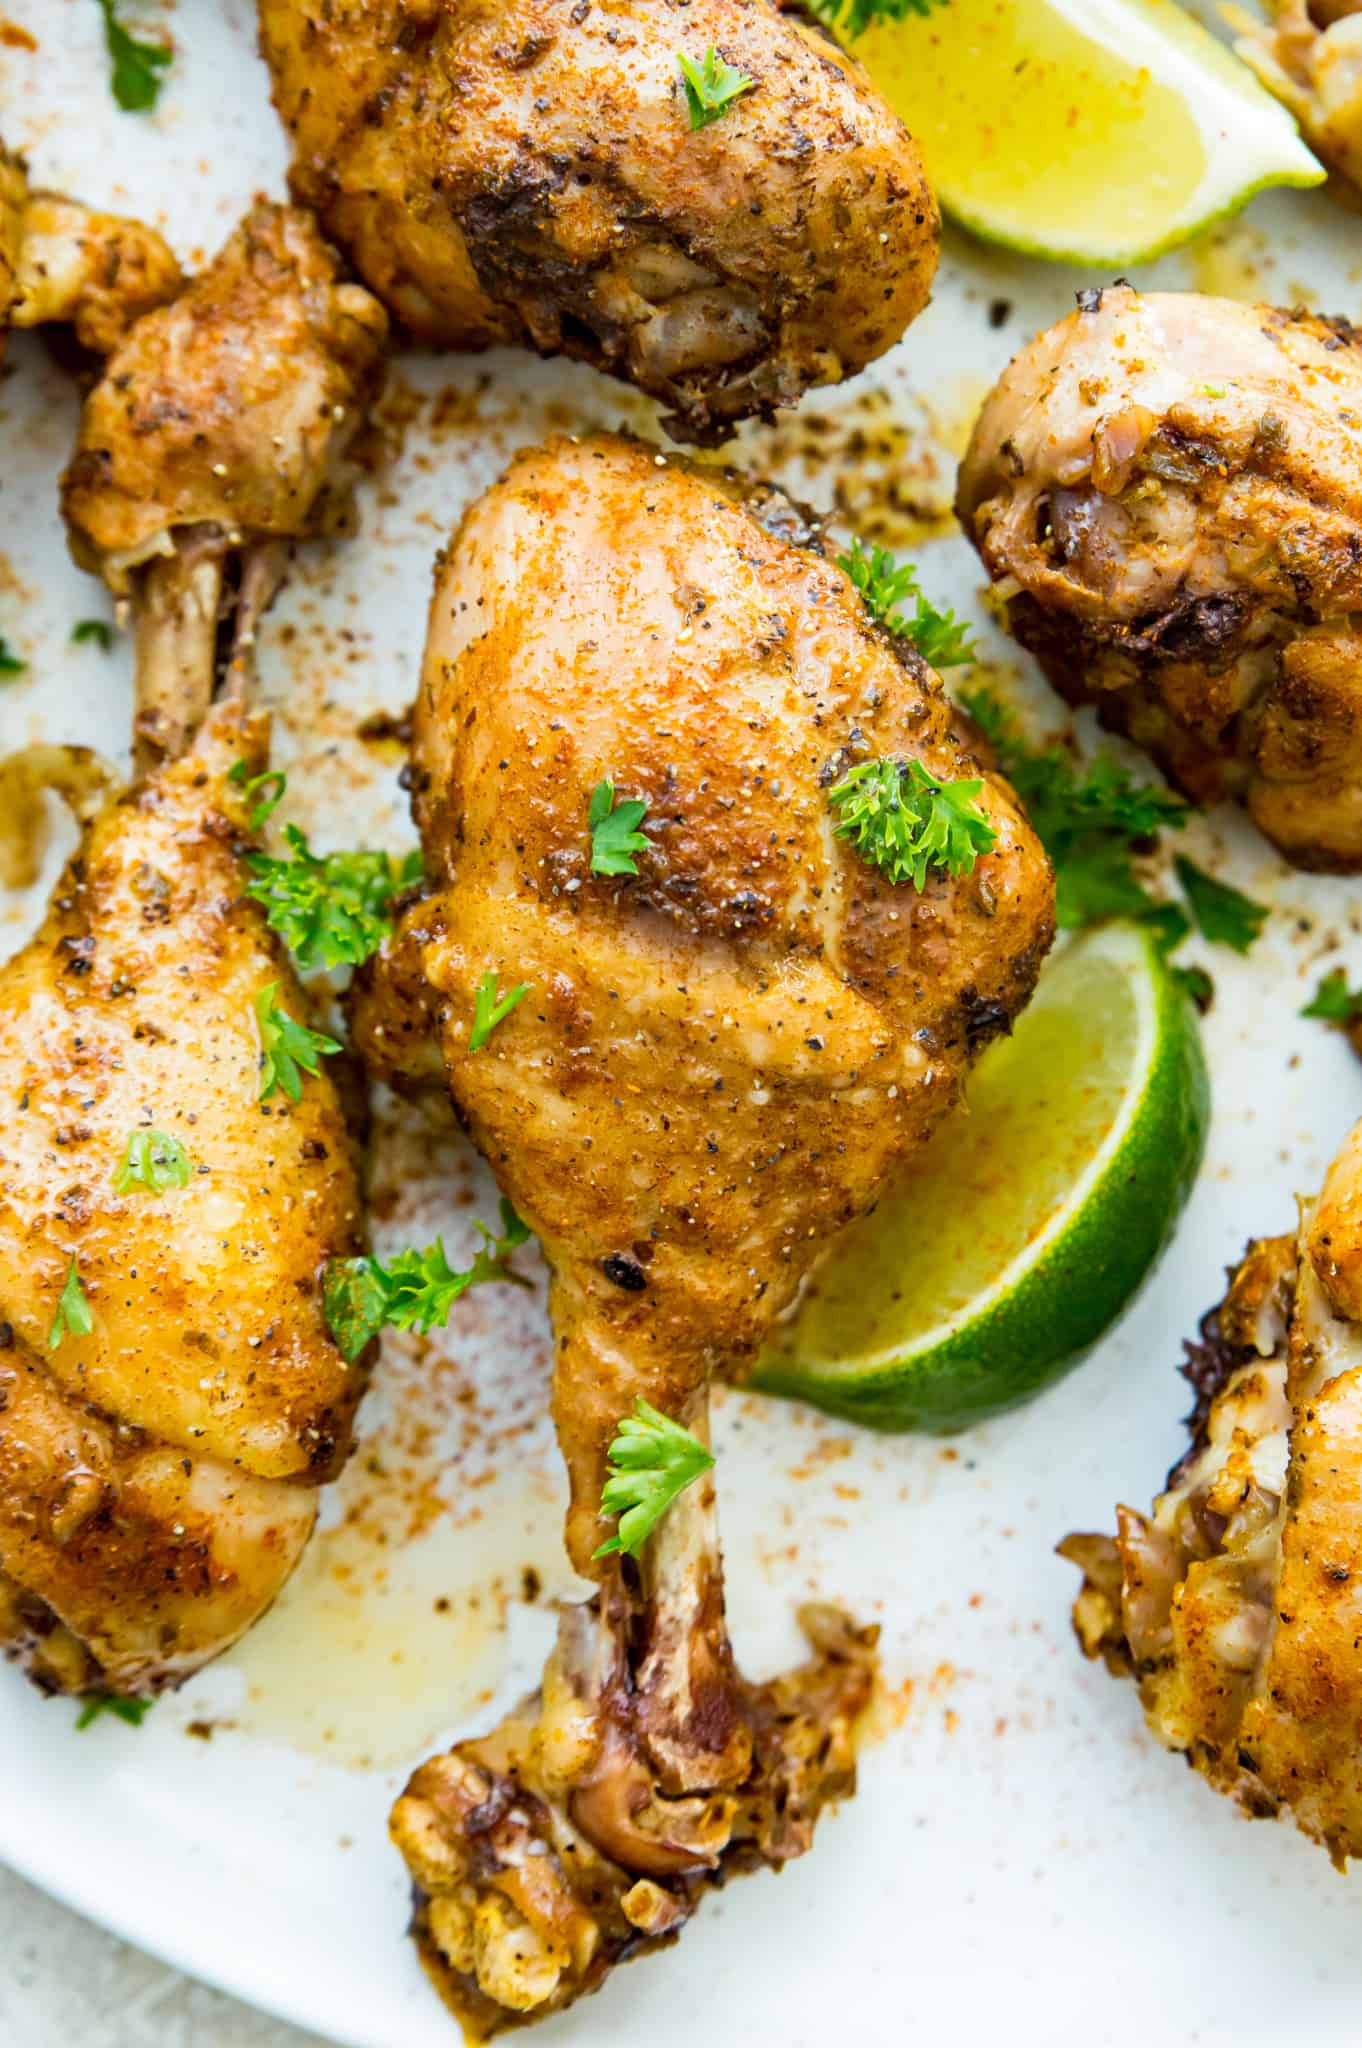 A plate of chicken drumsticks that were cooked in an Instant pot garnished with cilantro